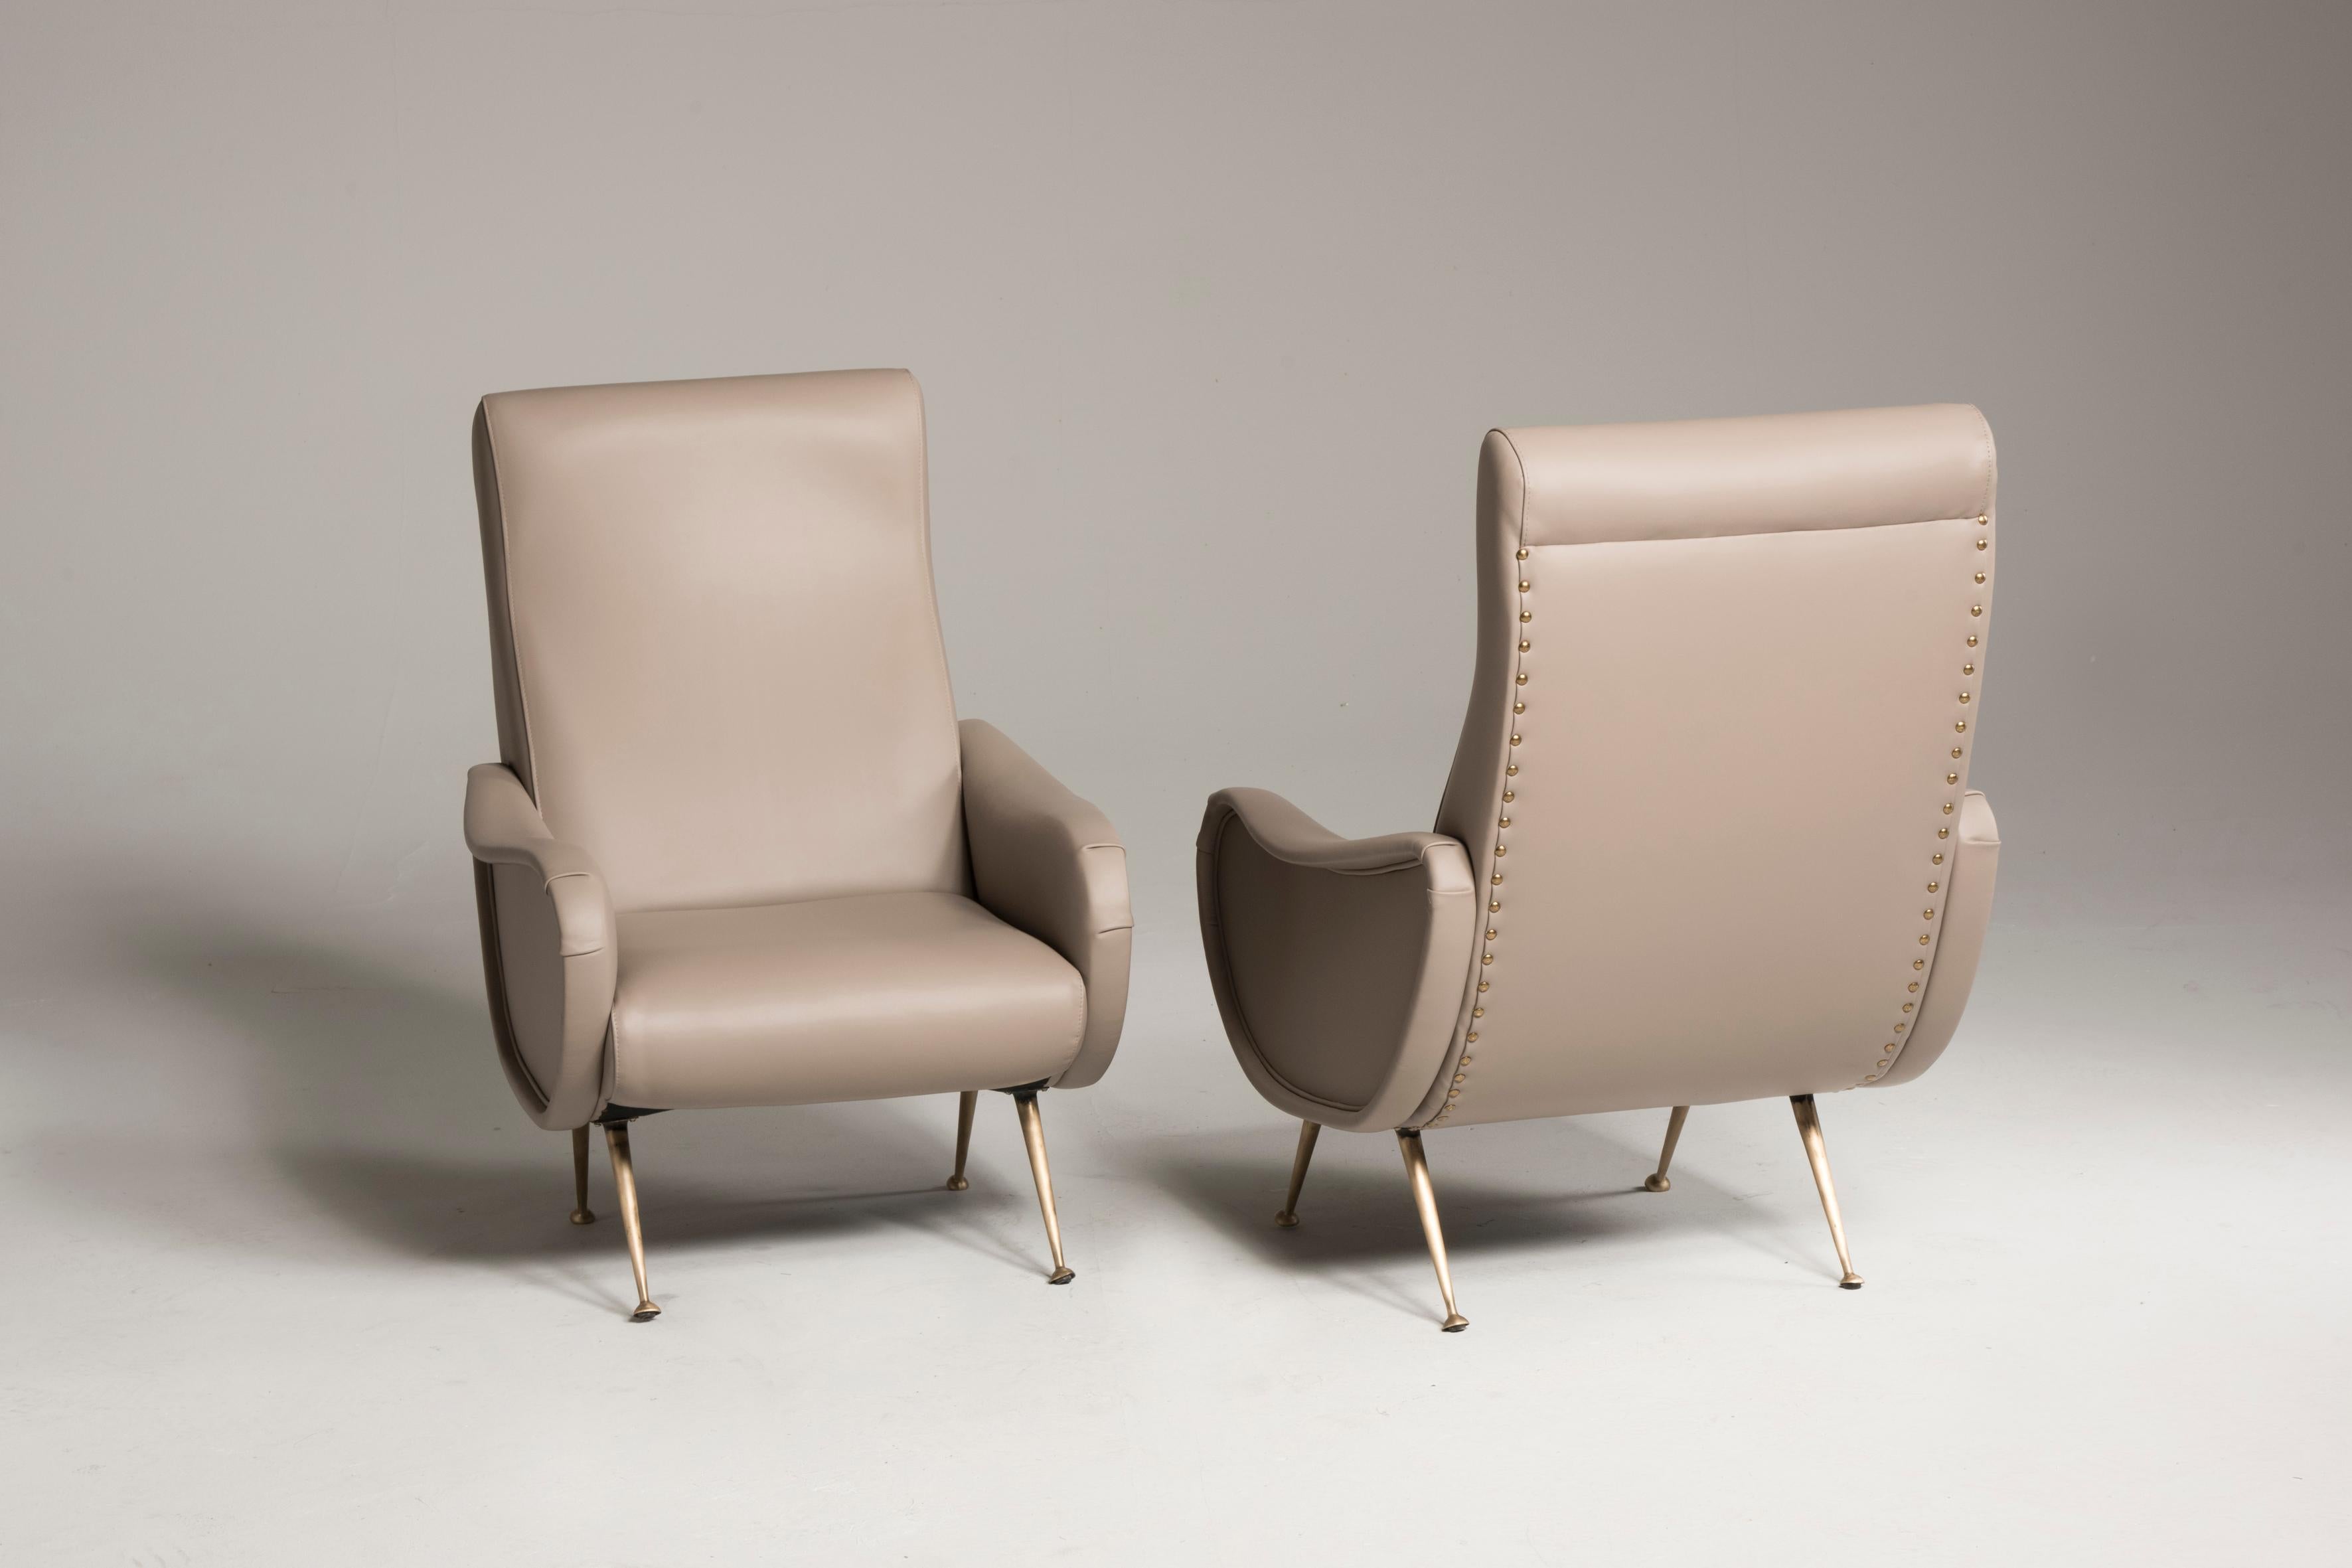 Mid-Century Modern 1950s Reupholstered Mauve Leather Armchairs in style of Zanuso Lady Model For Sale